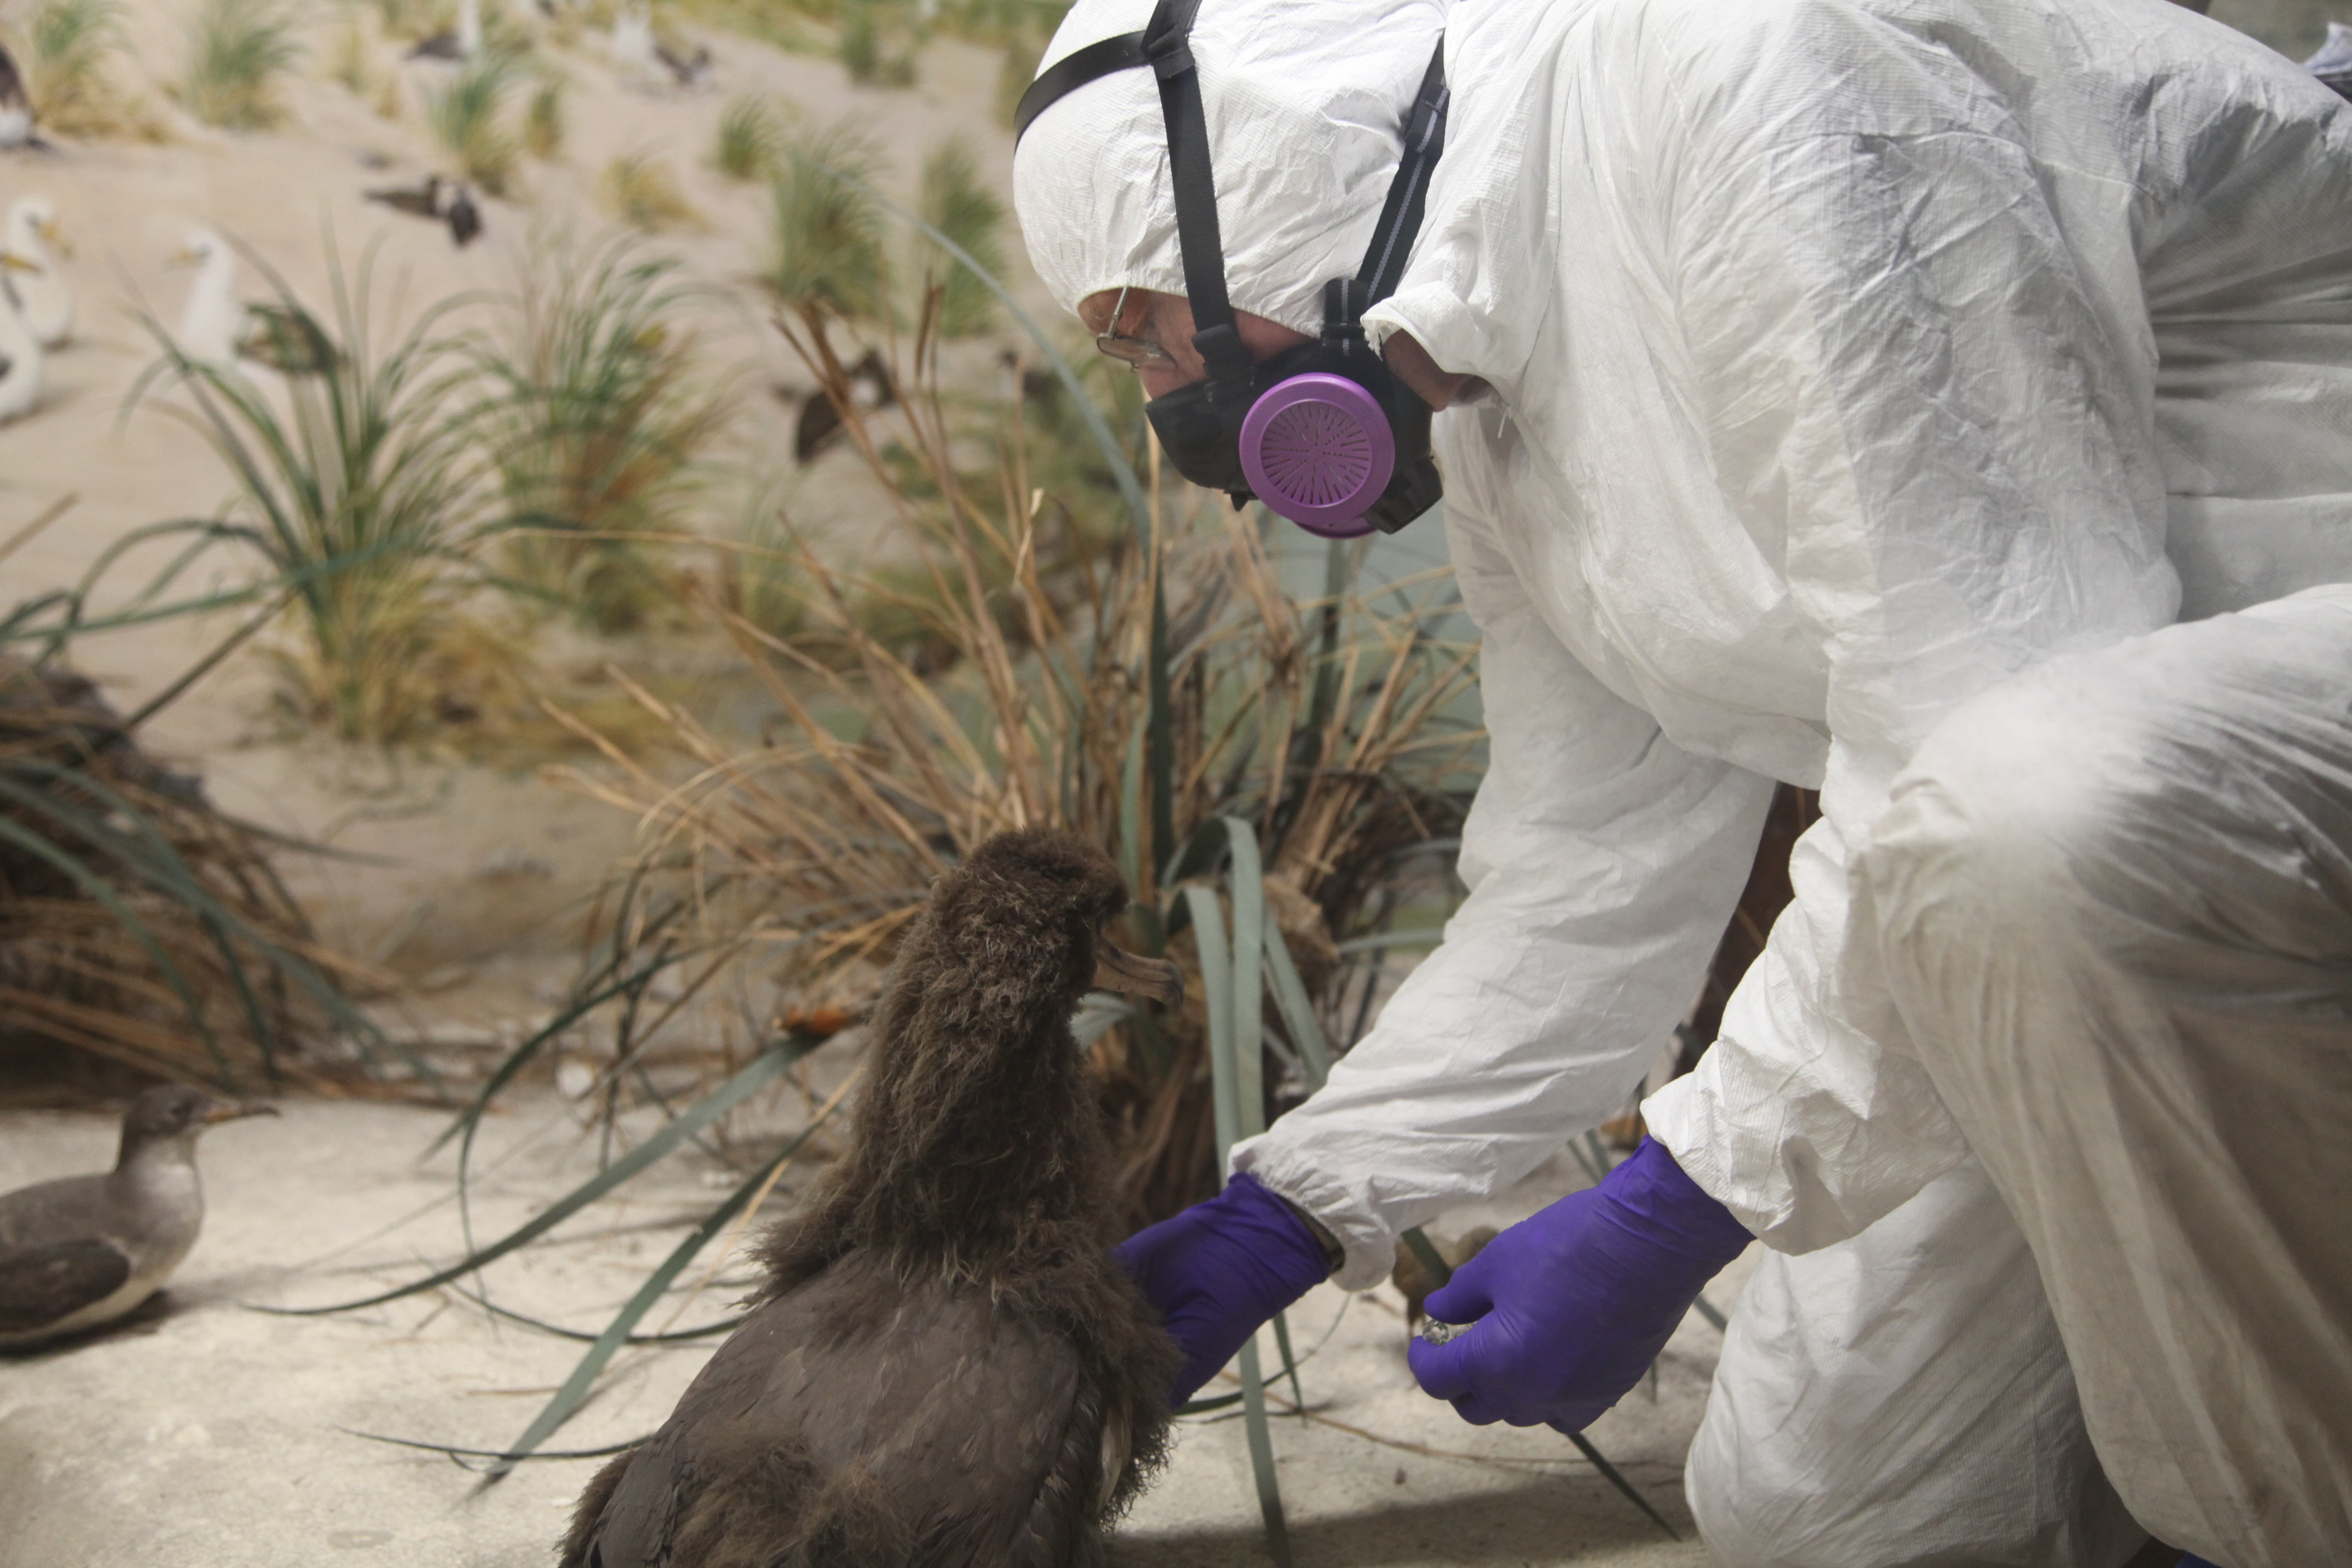 Ron swabs adolescent albatross to sample for chemicals and deterioration.